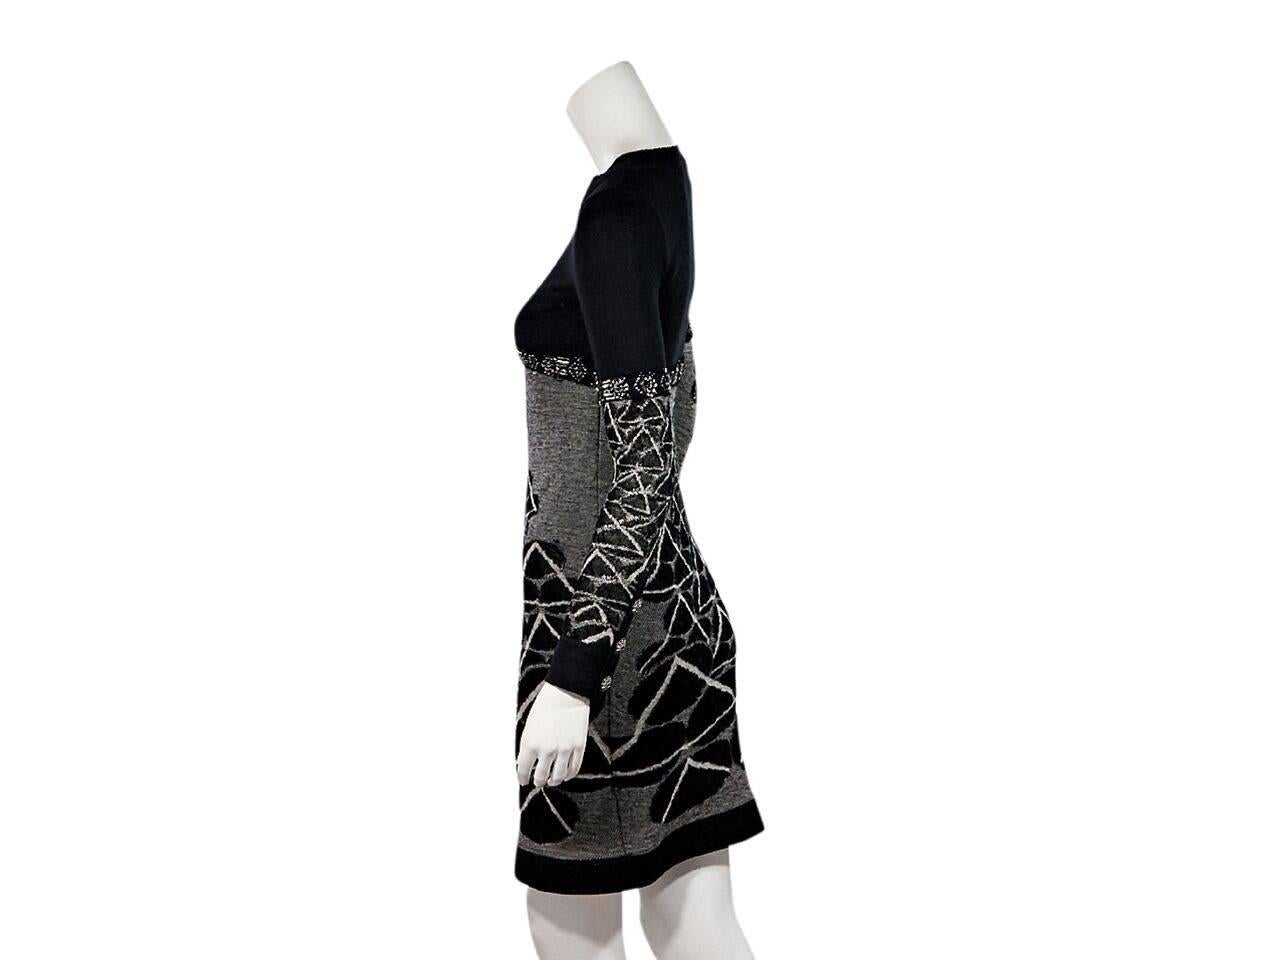 Product details:  Black wool intarsia sweater dress by Chanel.  Ribbed roundneck.  Long sleeves.  Three-button detail at cuffs.  Pullover style. 
Condition: Pre-owned. Very good.
Est. Retail $ 2,925.00